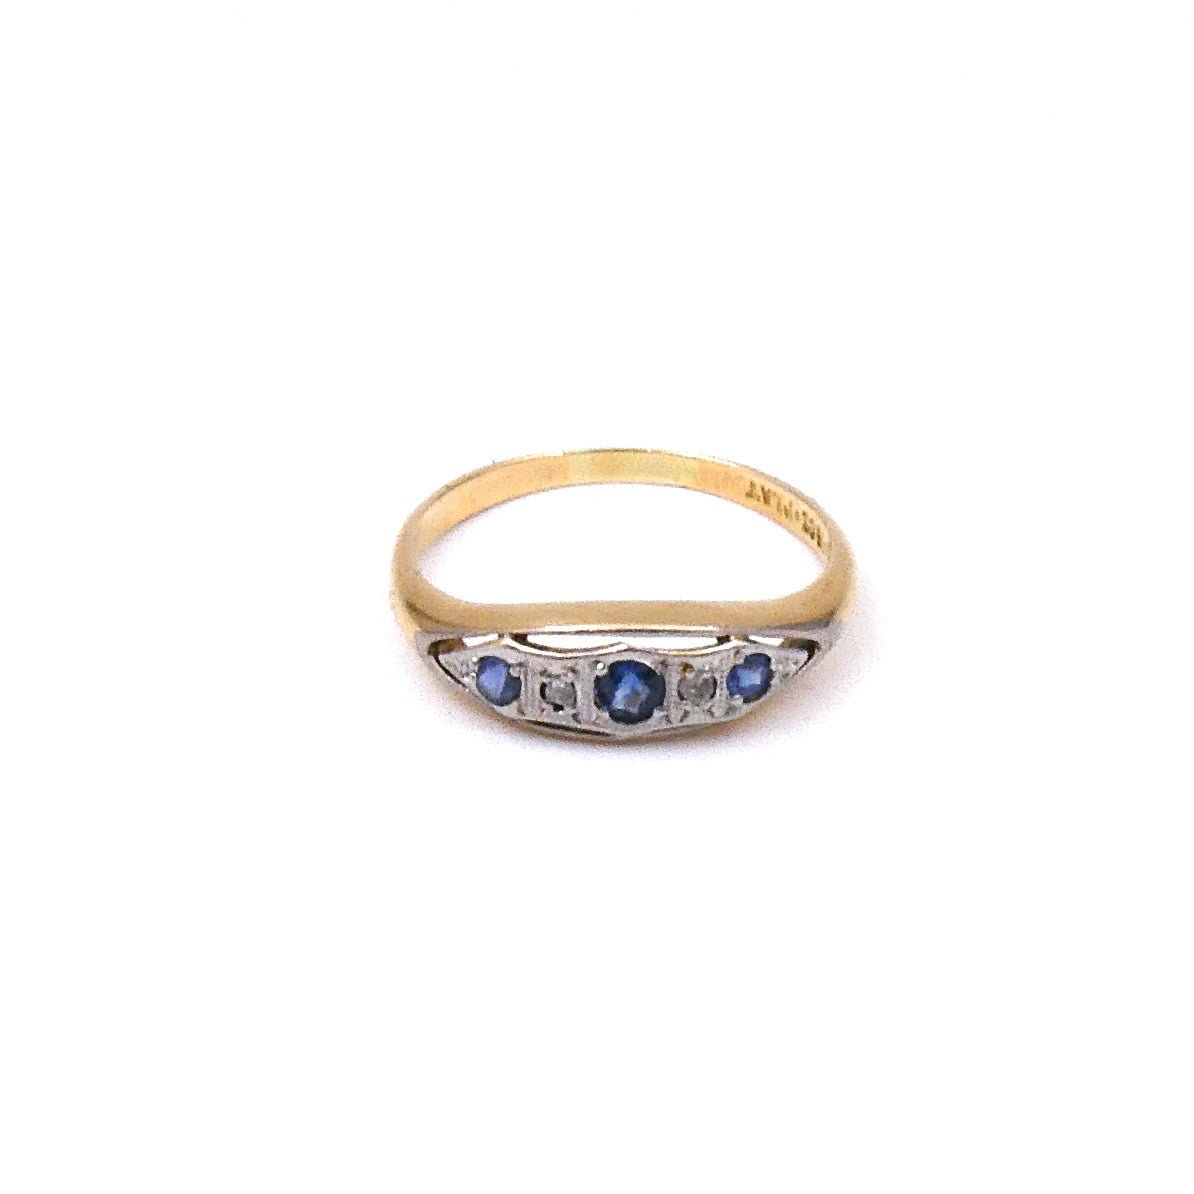 Elegant sapphire and diamond ring, horizontal navette shape, 18ct gold and platinun. - Collected